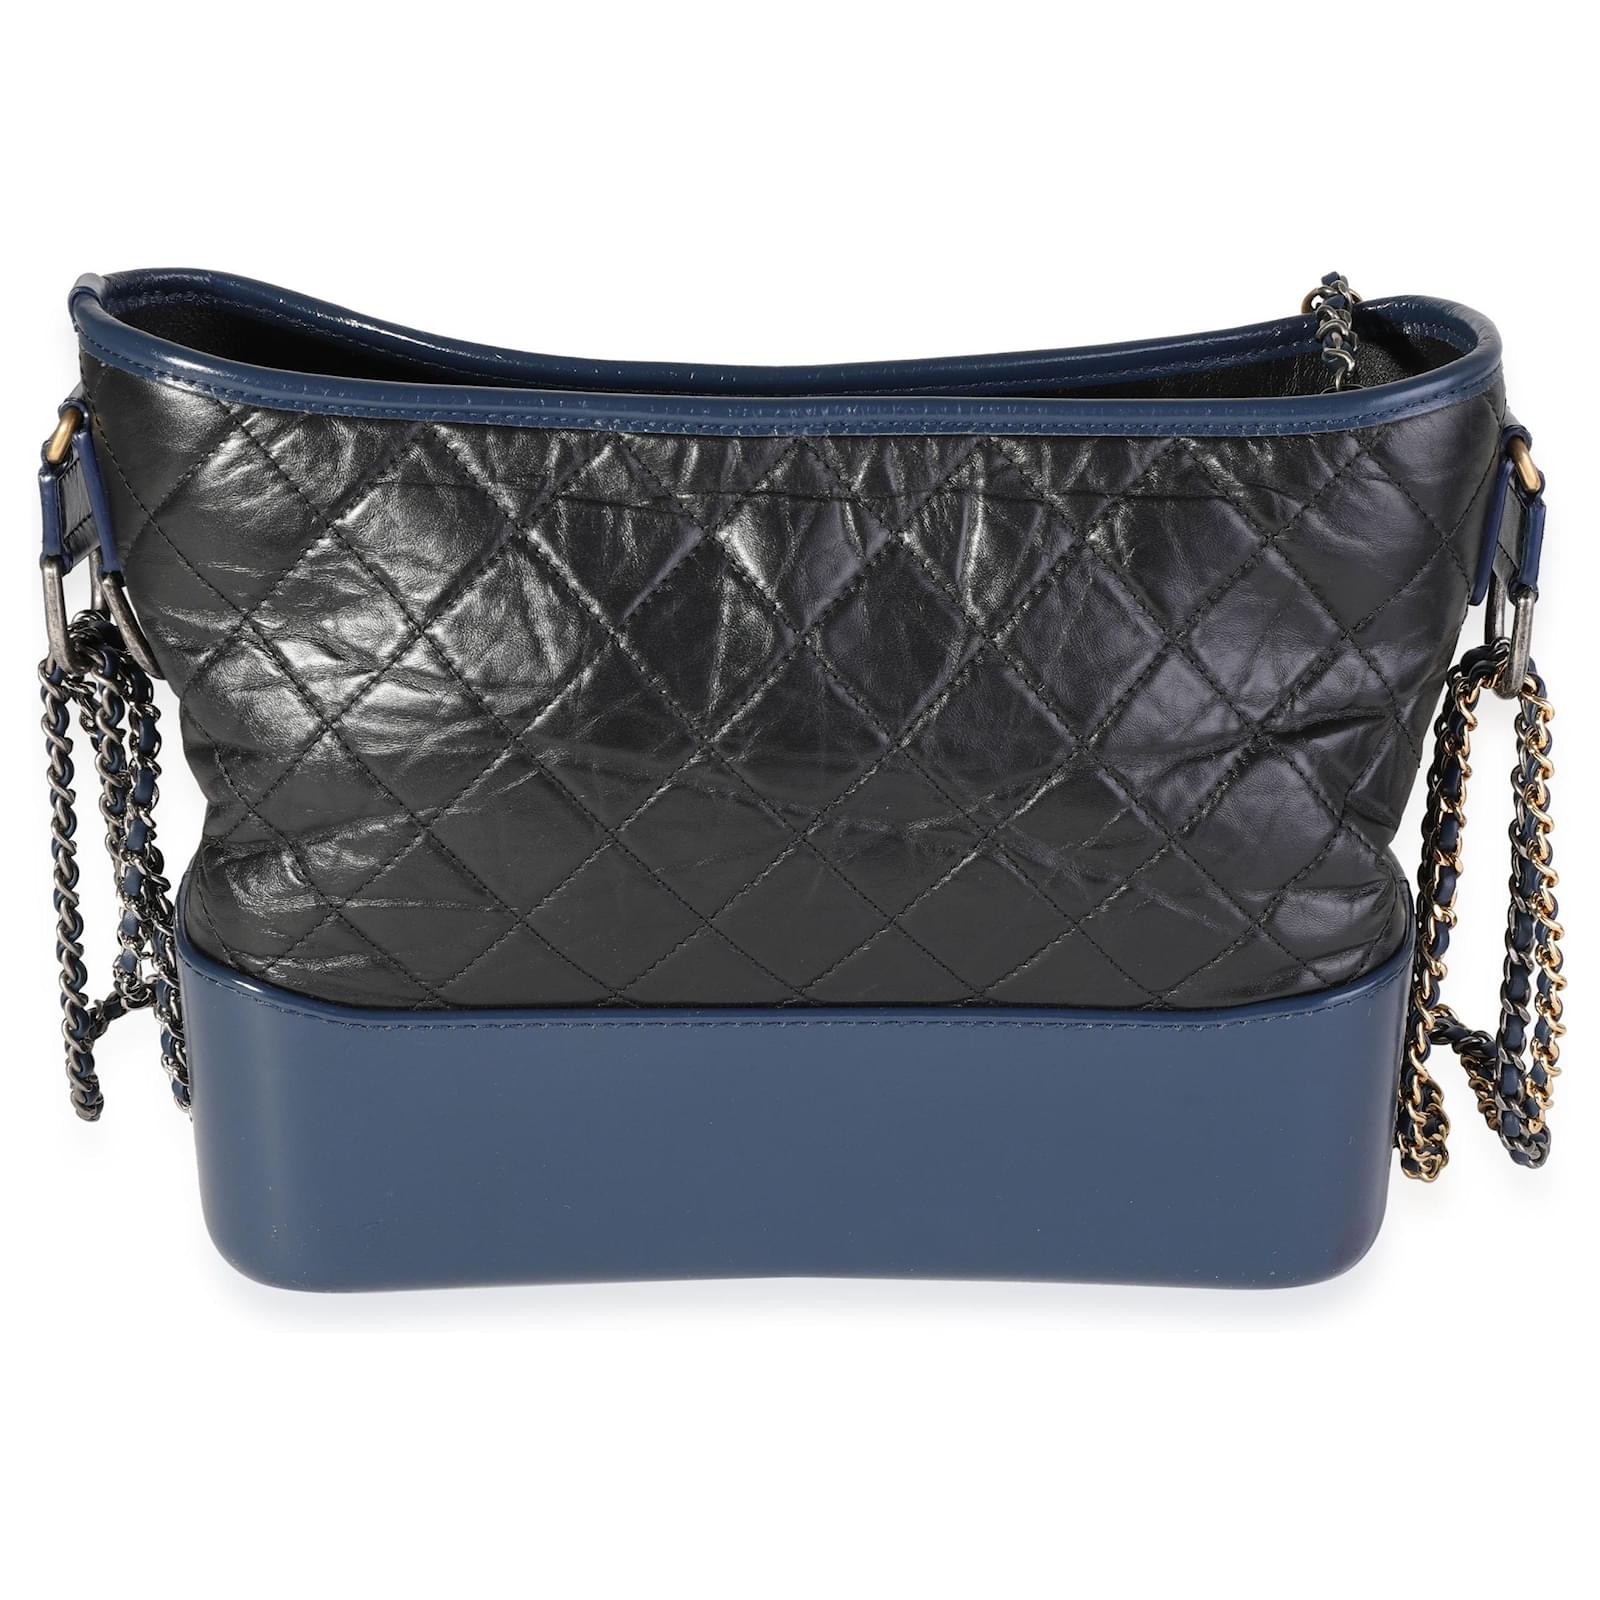 Chanel Large Gabrielle Hobo, Distressed leather, Blue/Black